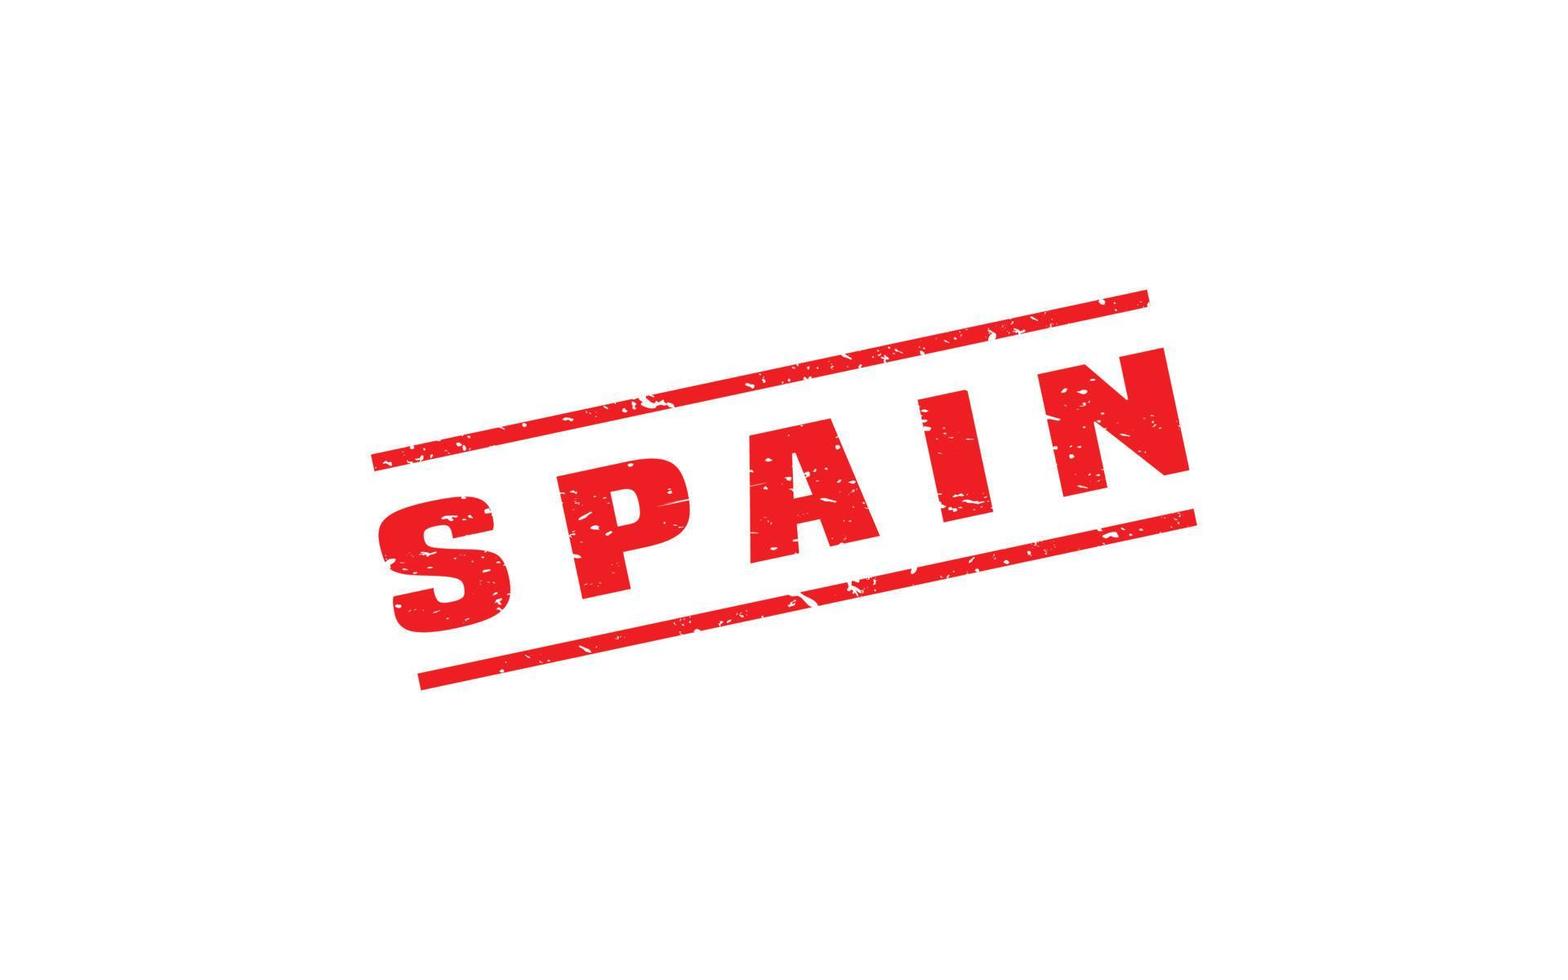 SPAIN stamp rubber with grunge style on white background vector